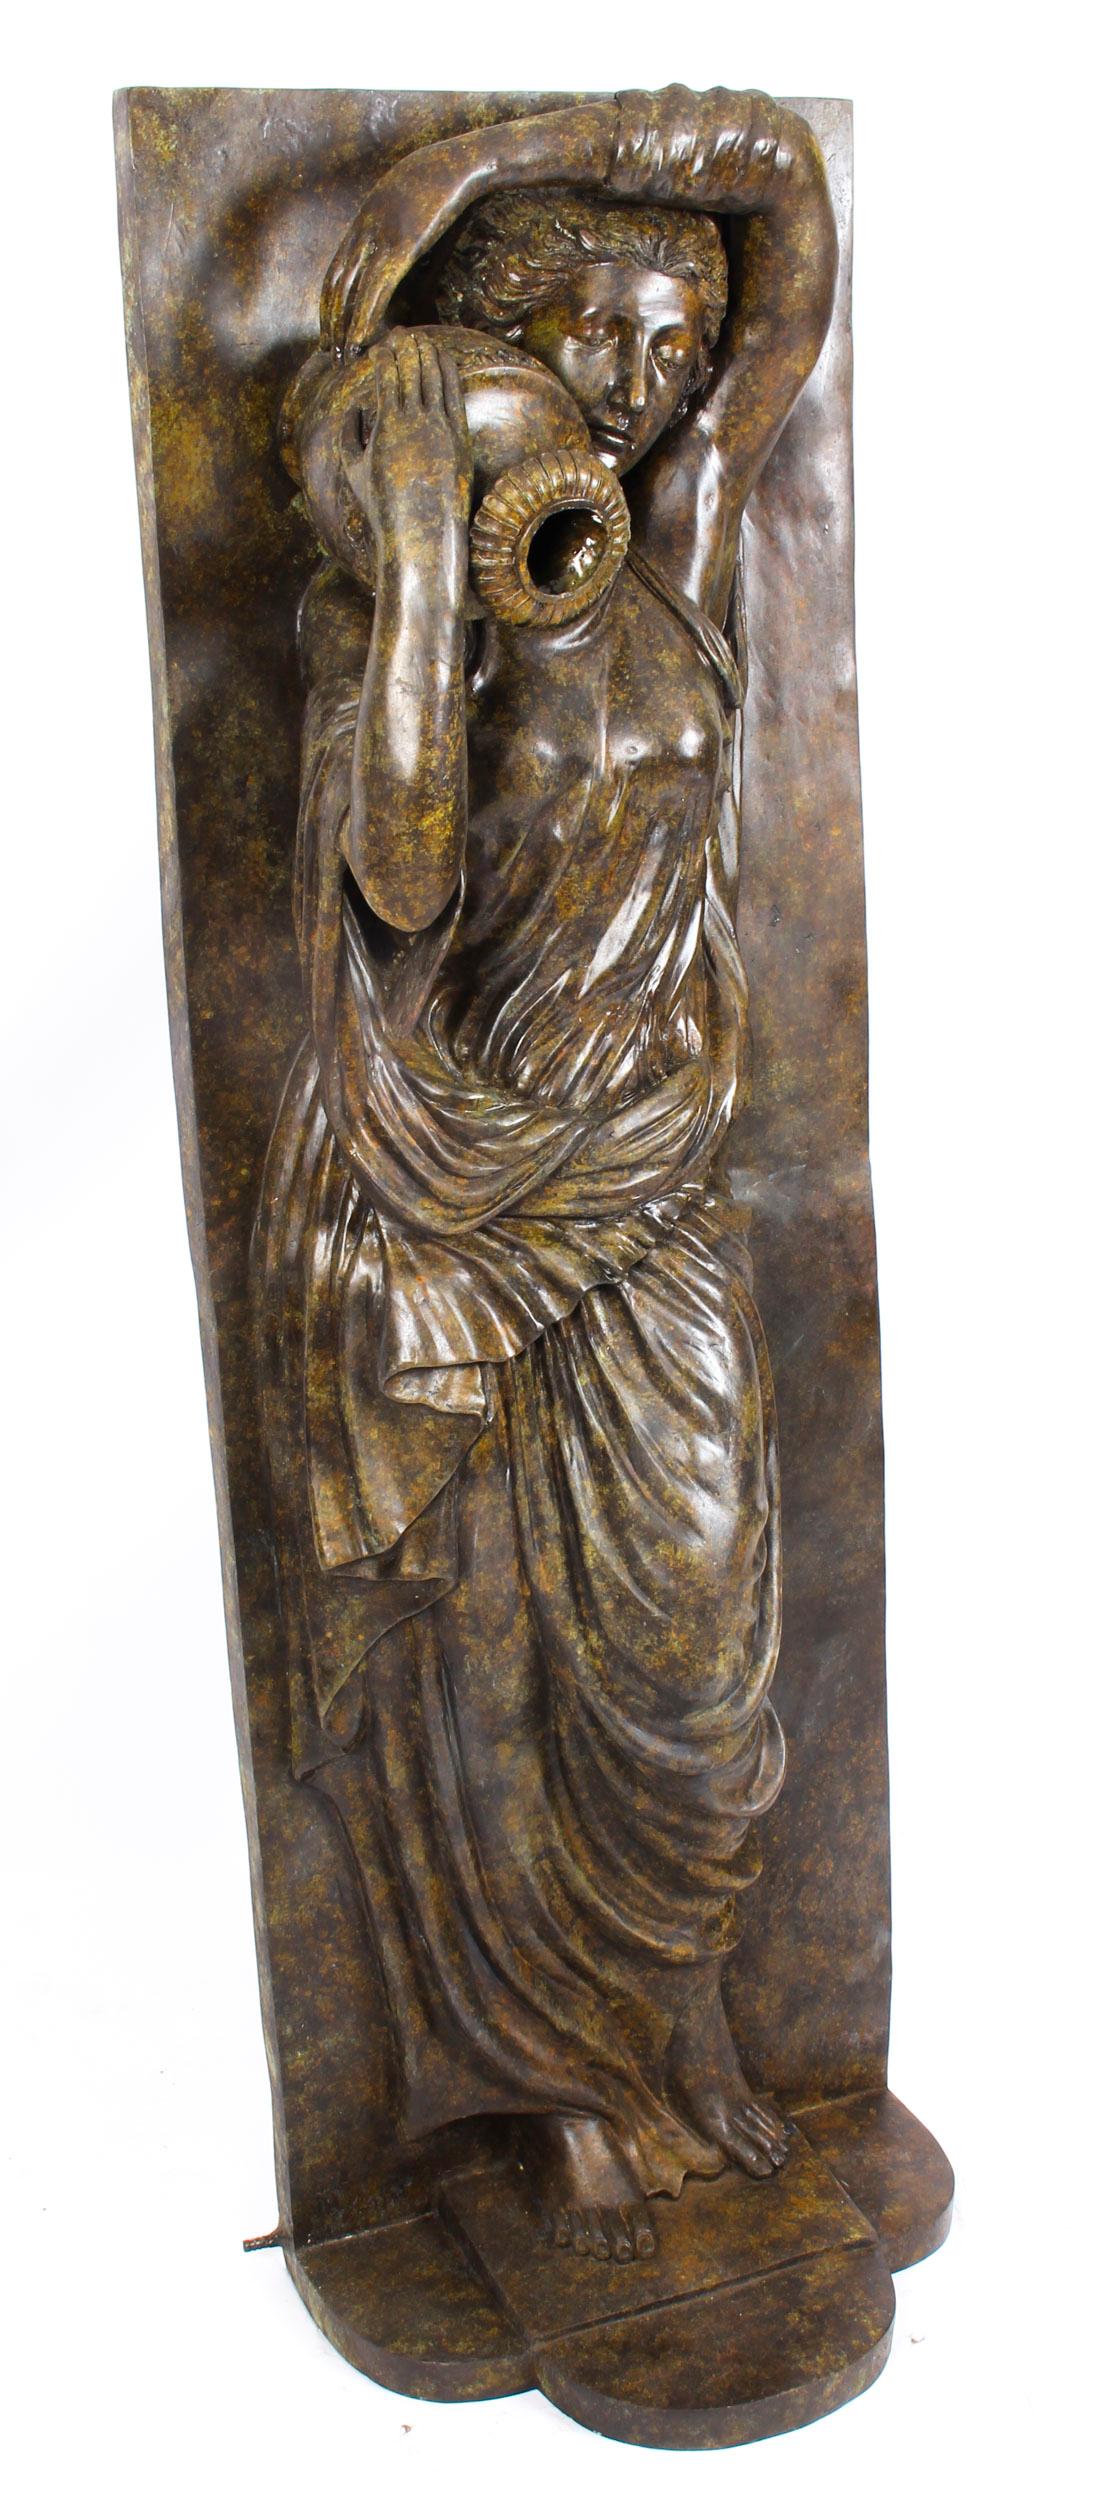 This is a wonderful and high-quality solid bronze sculpture and fountain in the form of a delightful neoclassical lady holding an amphora, from the last quarter of the 20th century.

This beautiful large bronze statue features a composed lady